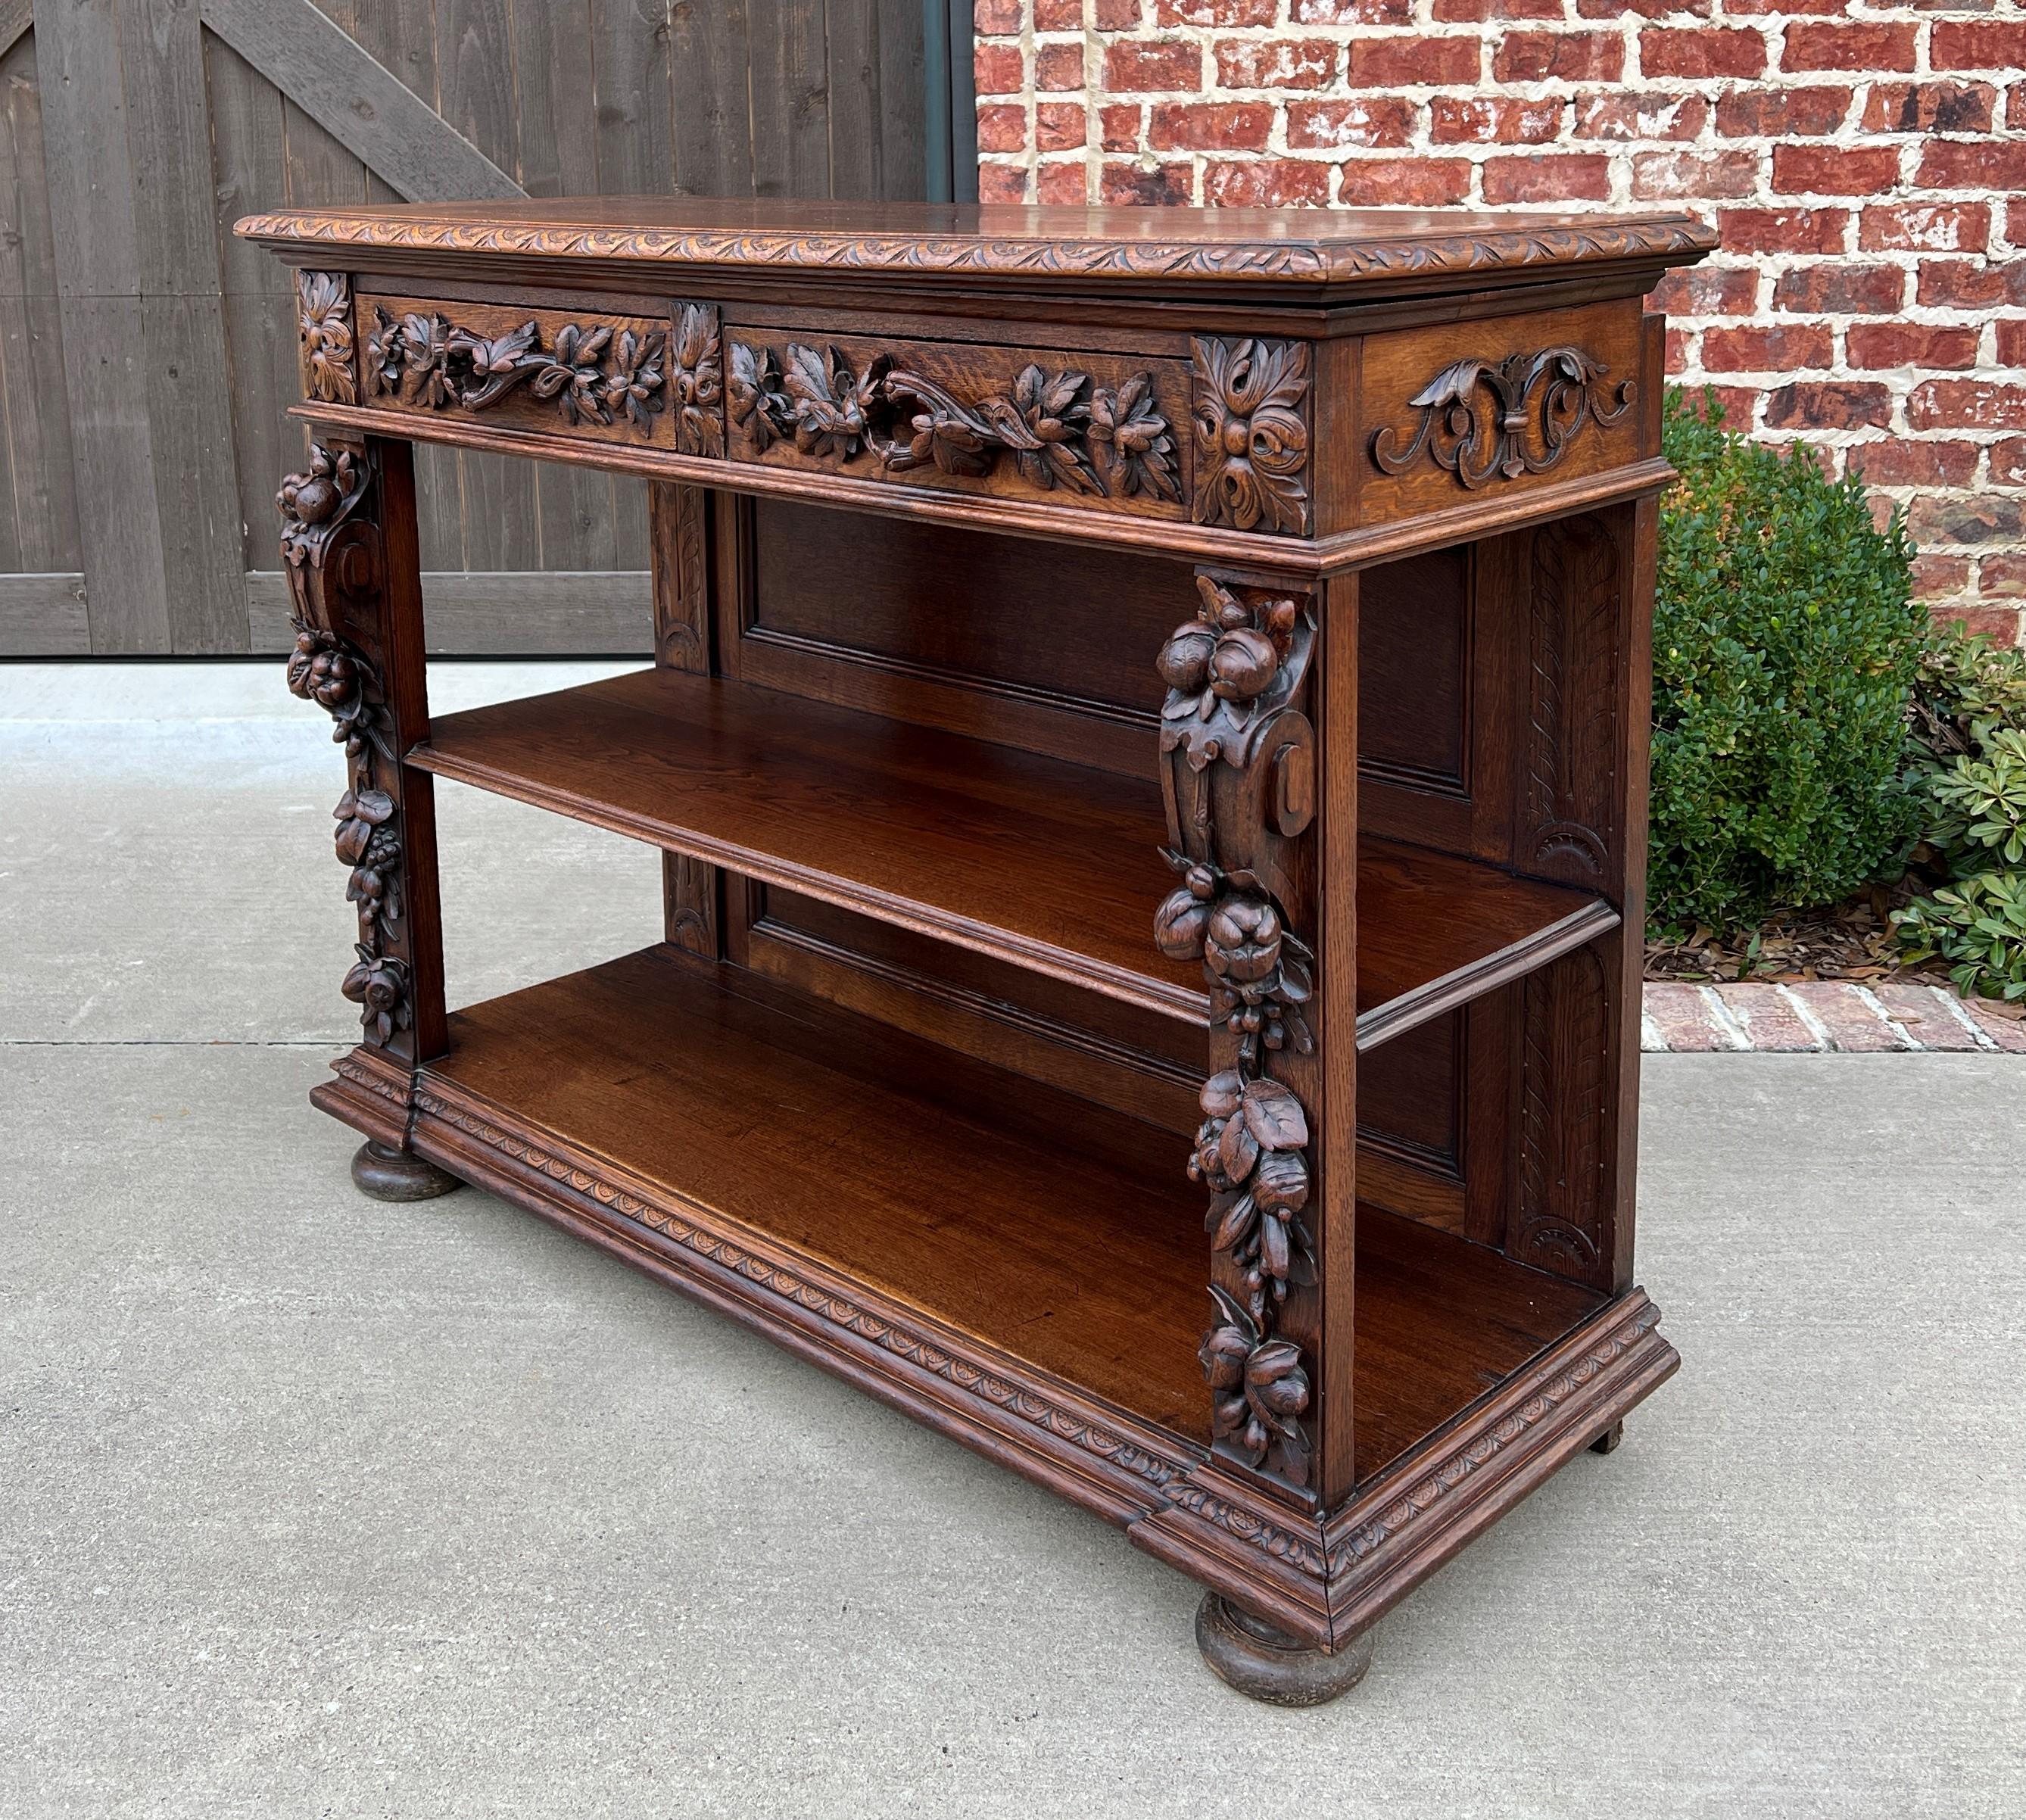 Renaissance Revival Antique French Server Sideboard Console Sofa Table 3-Tier Drawers Carved Oak 19c For Sale